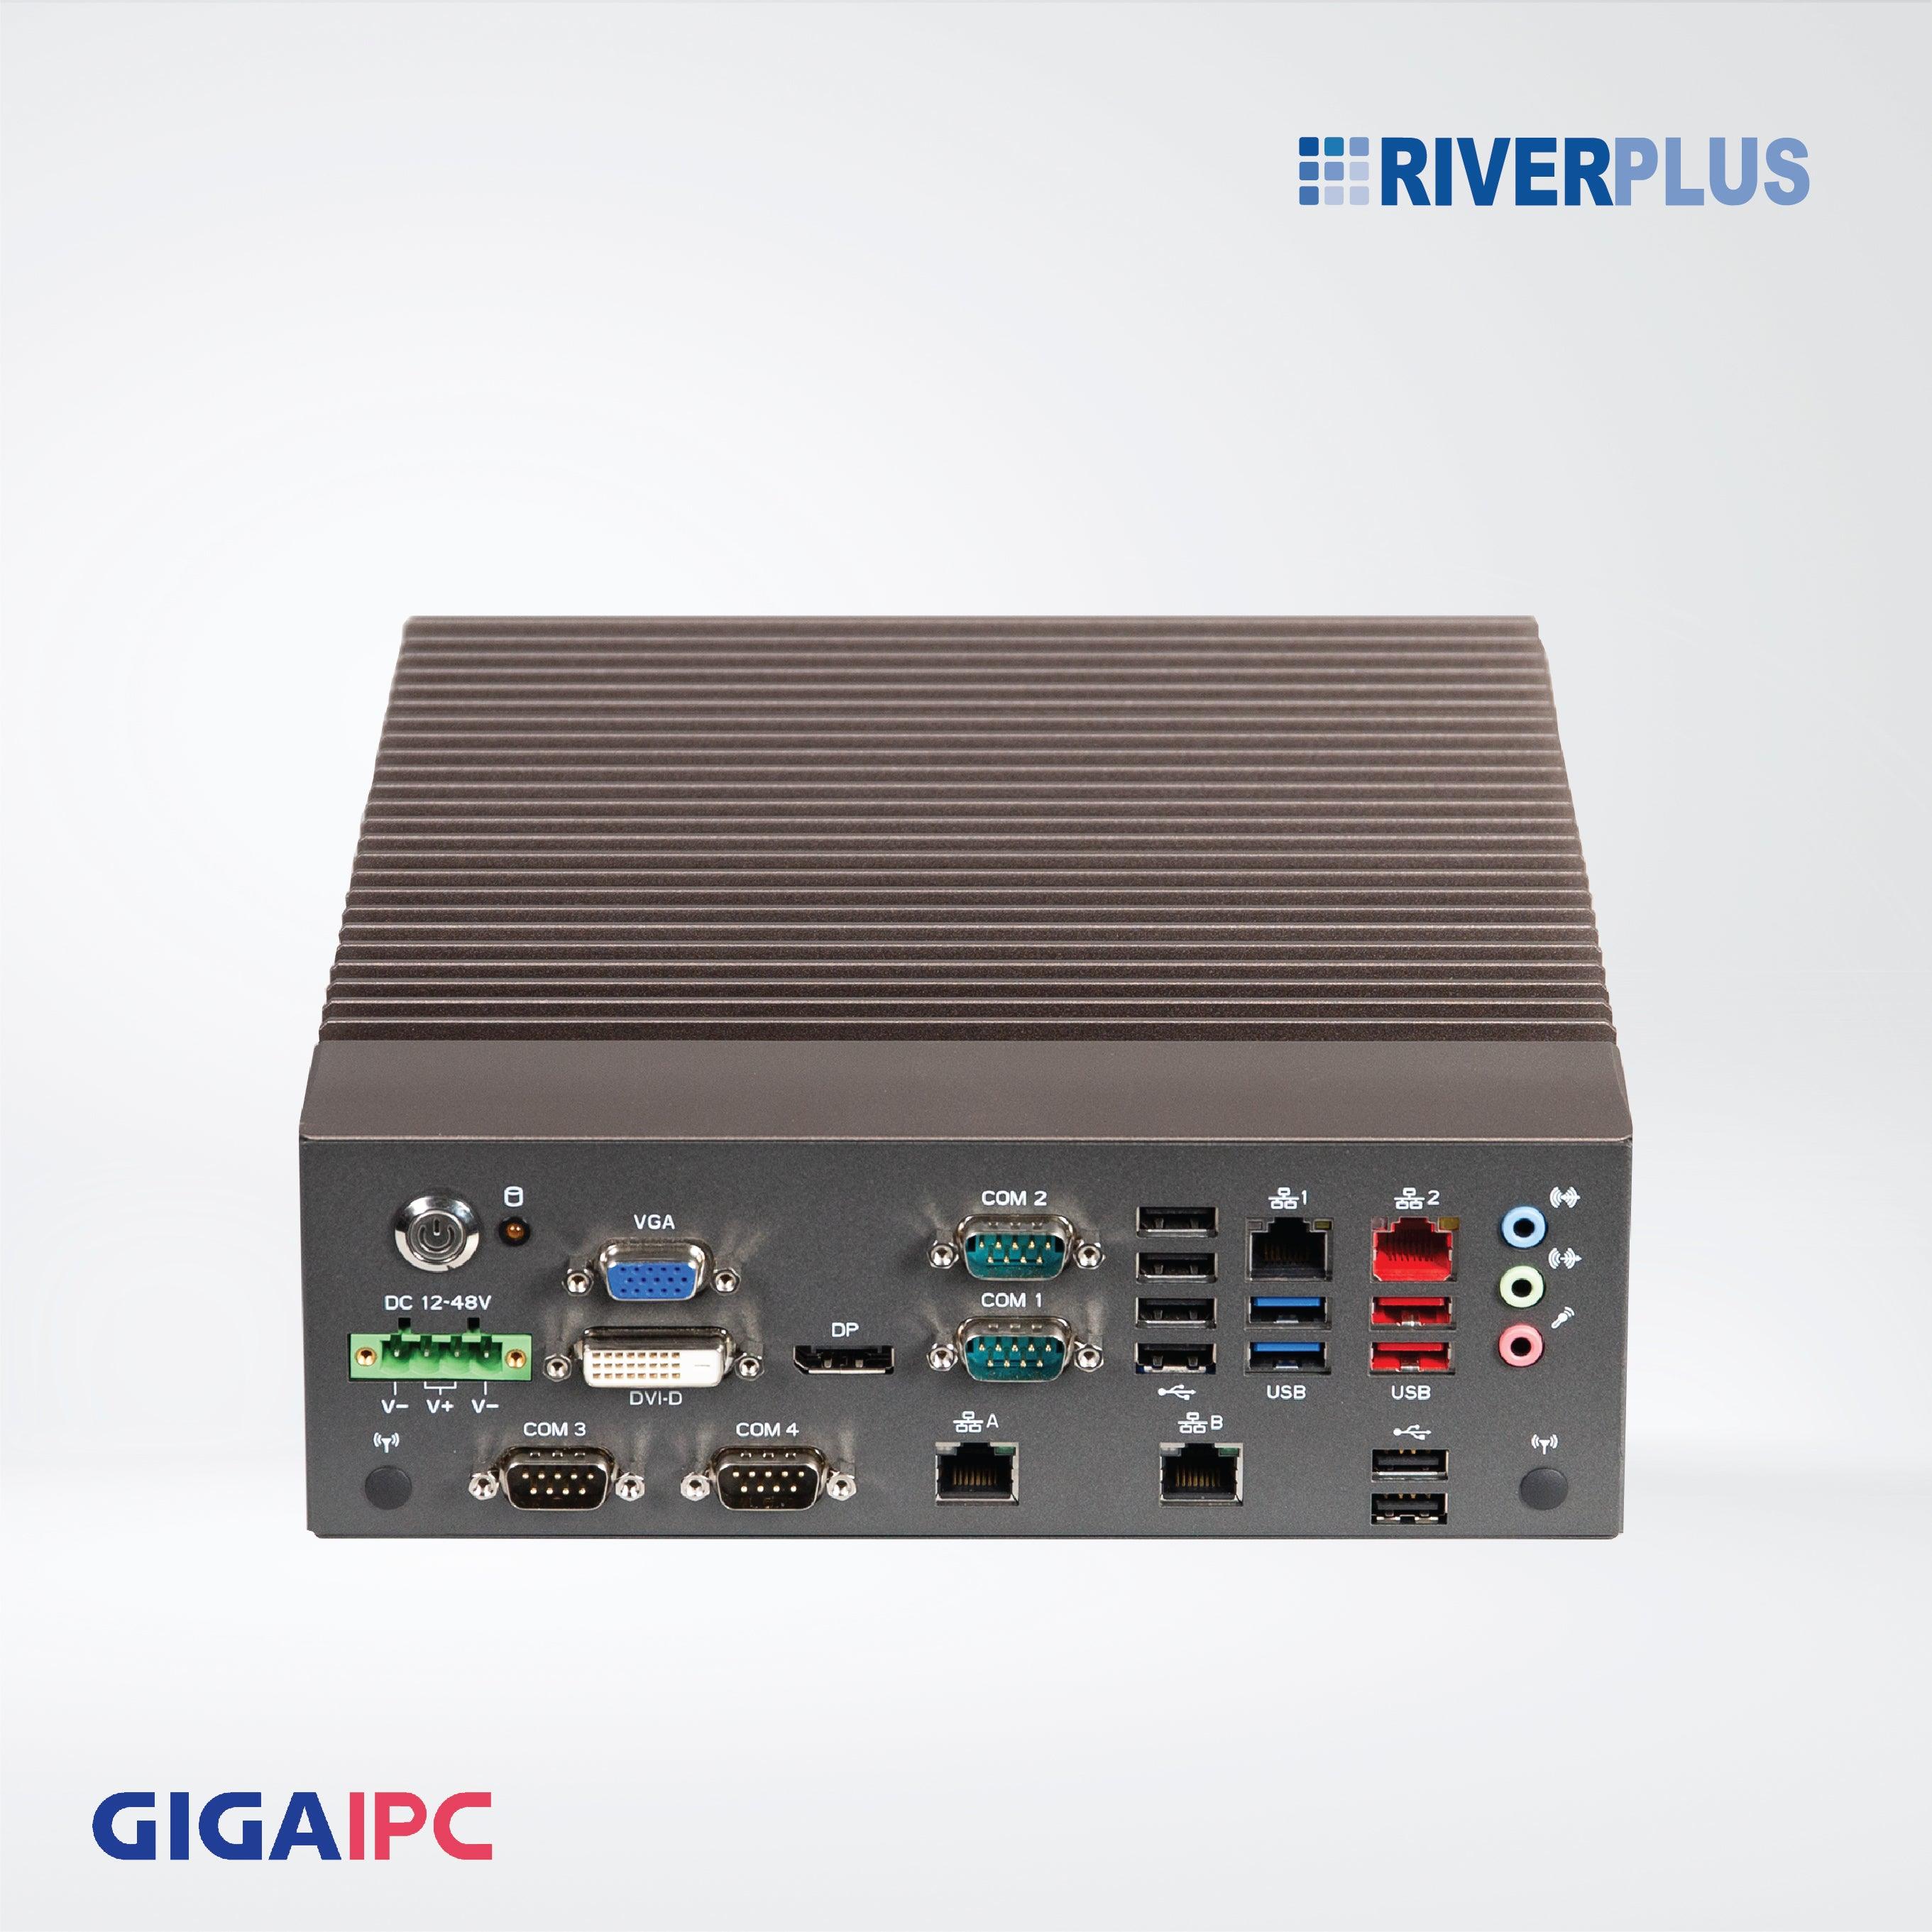 QBiX-JMB-ADLA67EH-A1 Industrial system with Intel® Q670E Chipset, support for Intel® 13th/12th Gen Processor - Riverplus